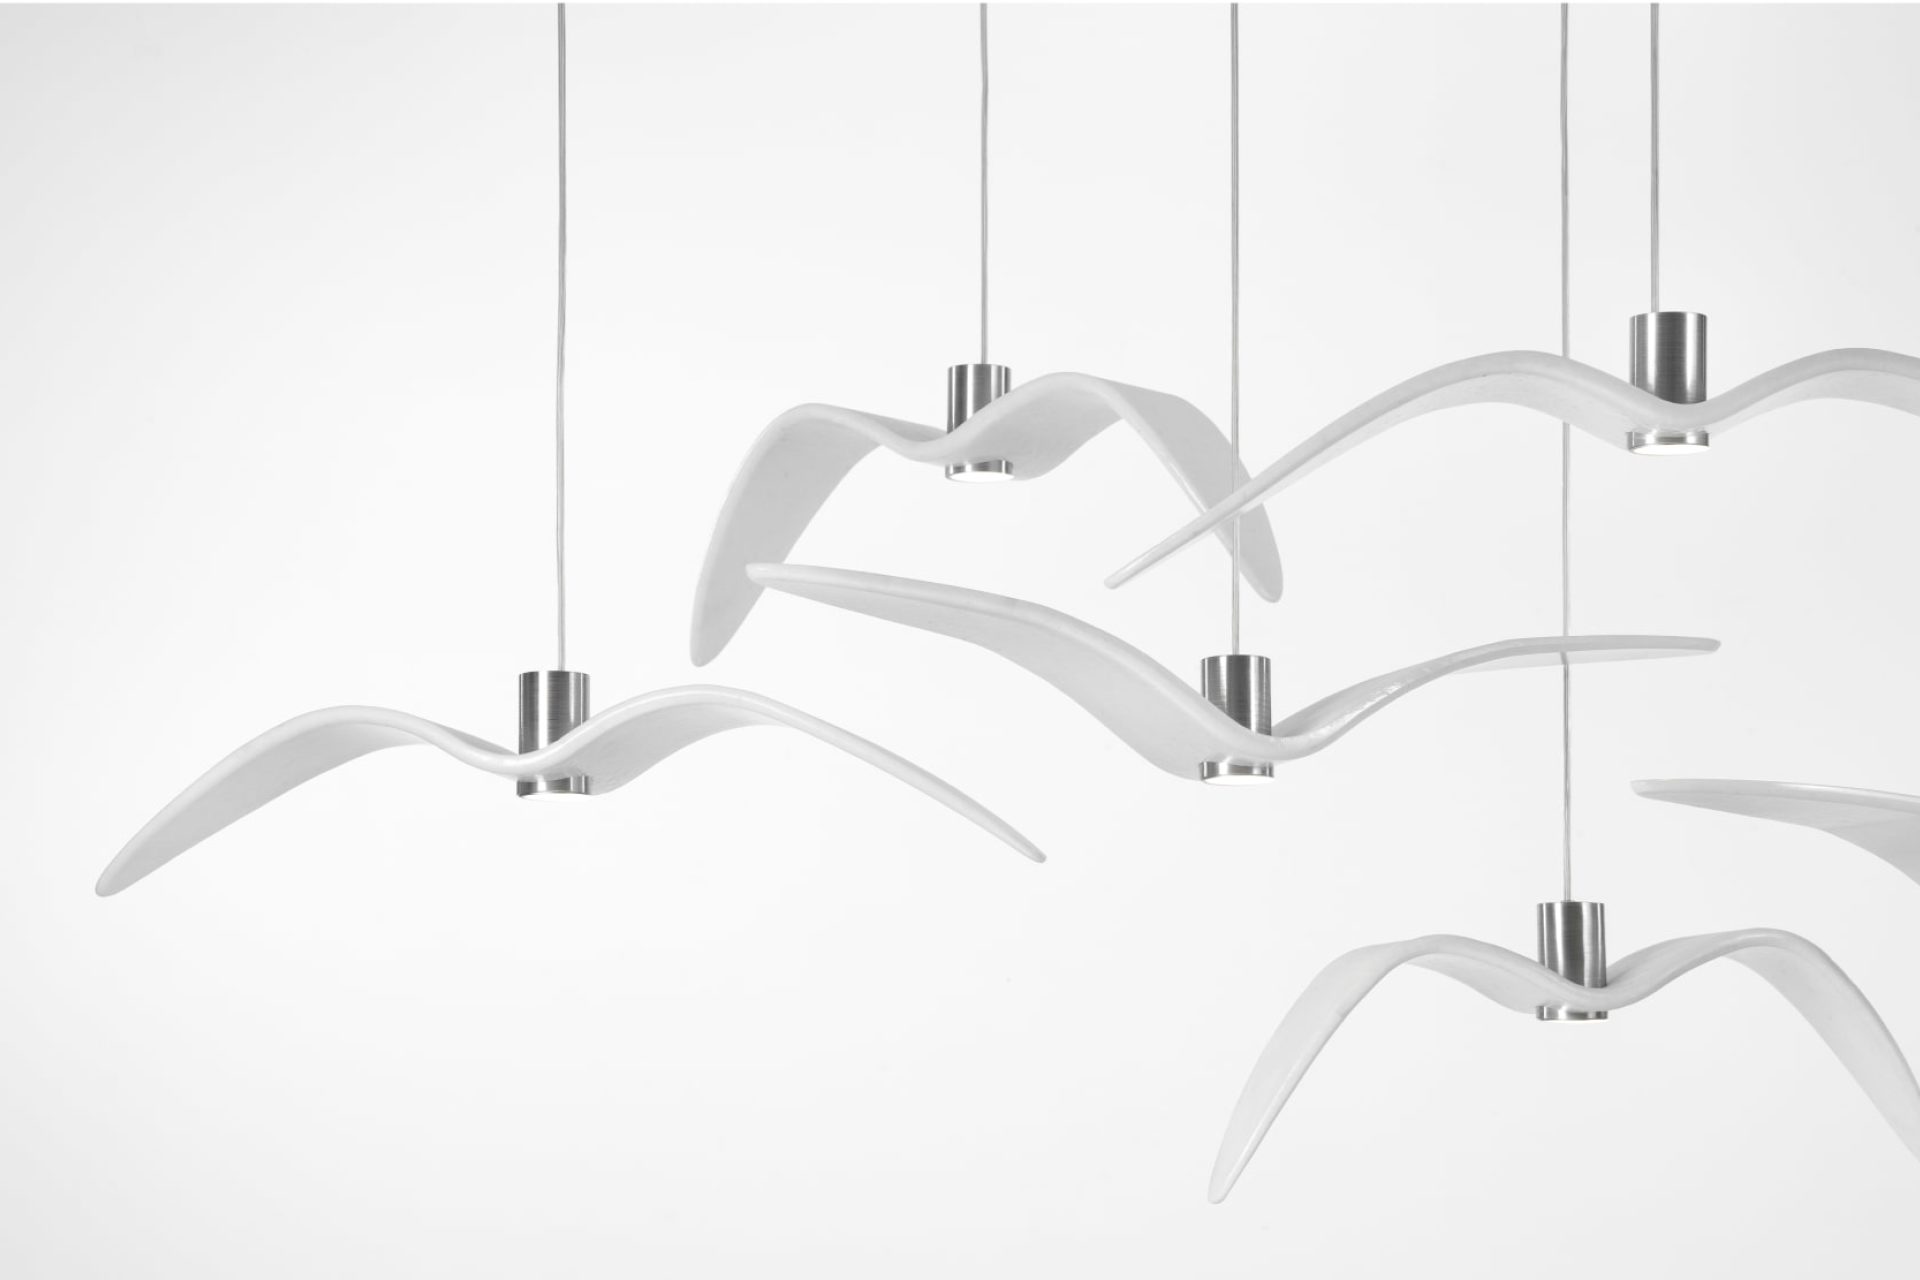 Pendant lamps made of white glass, inspired by the flying birds